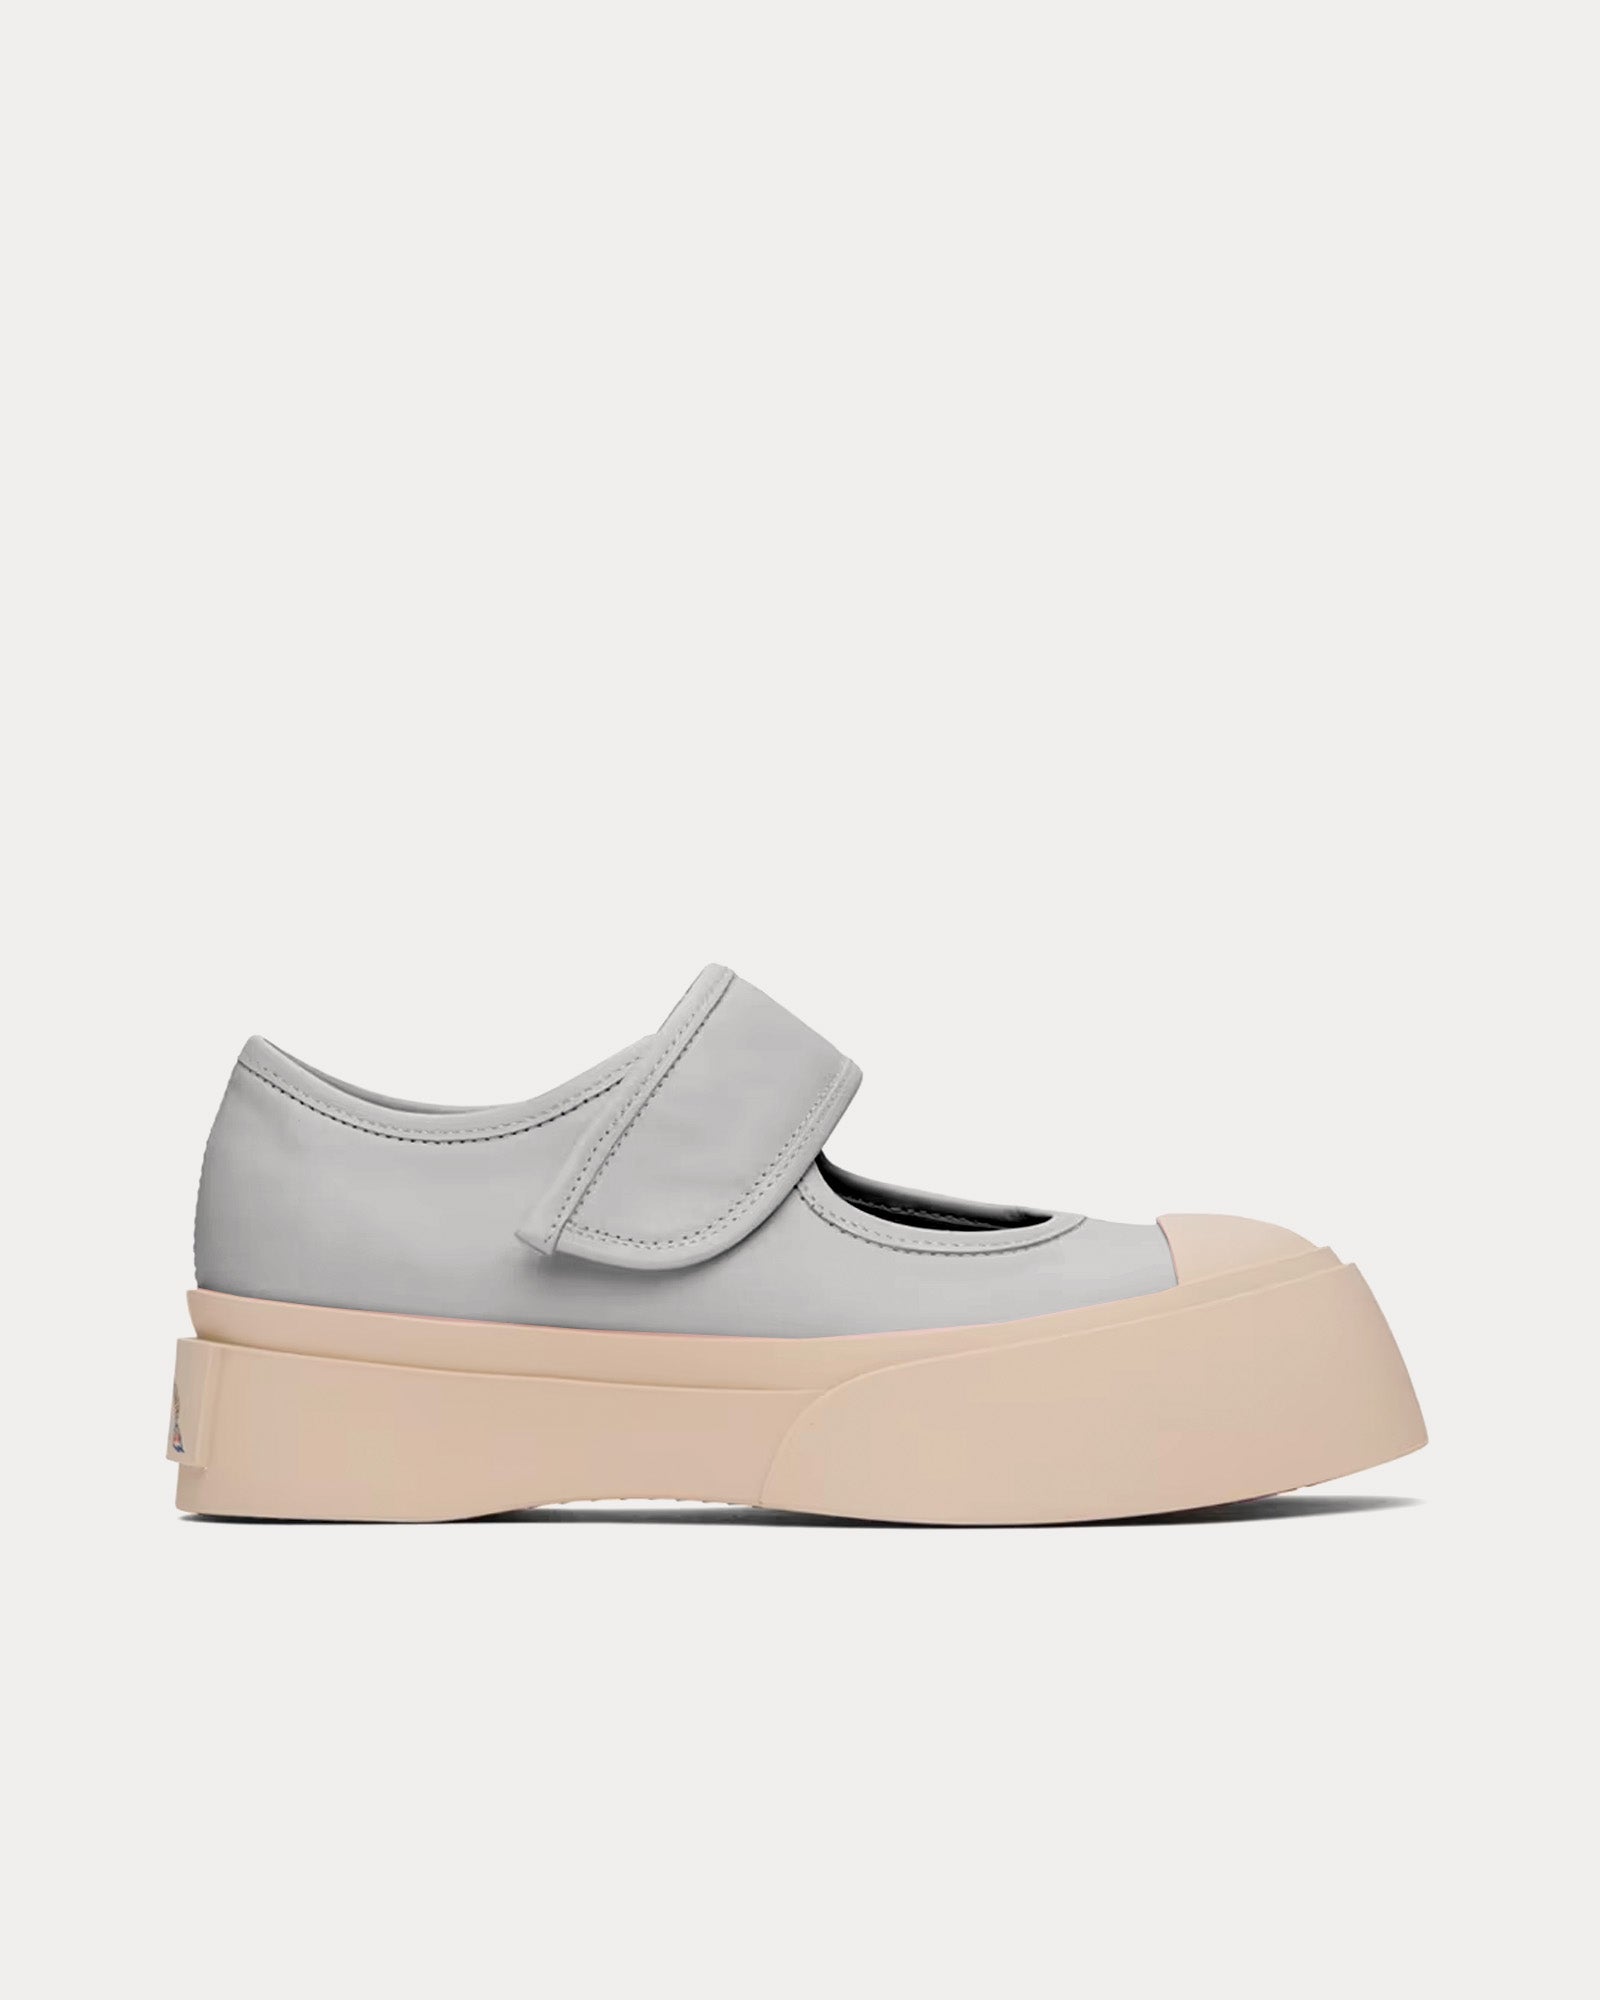 Marni - Mary Jane Leather Grey Slip On Sneakers